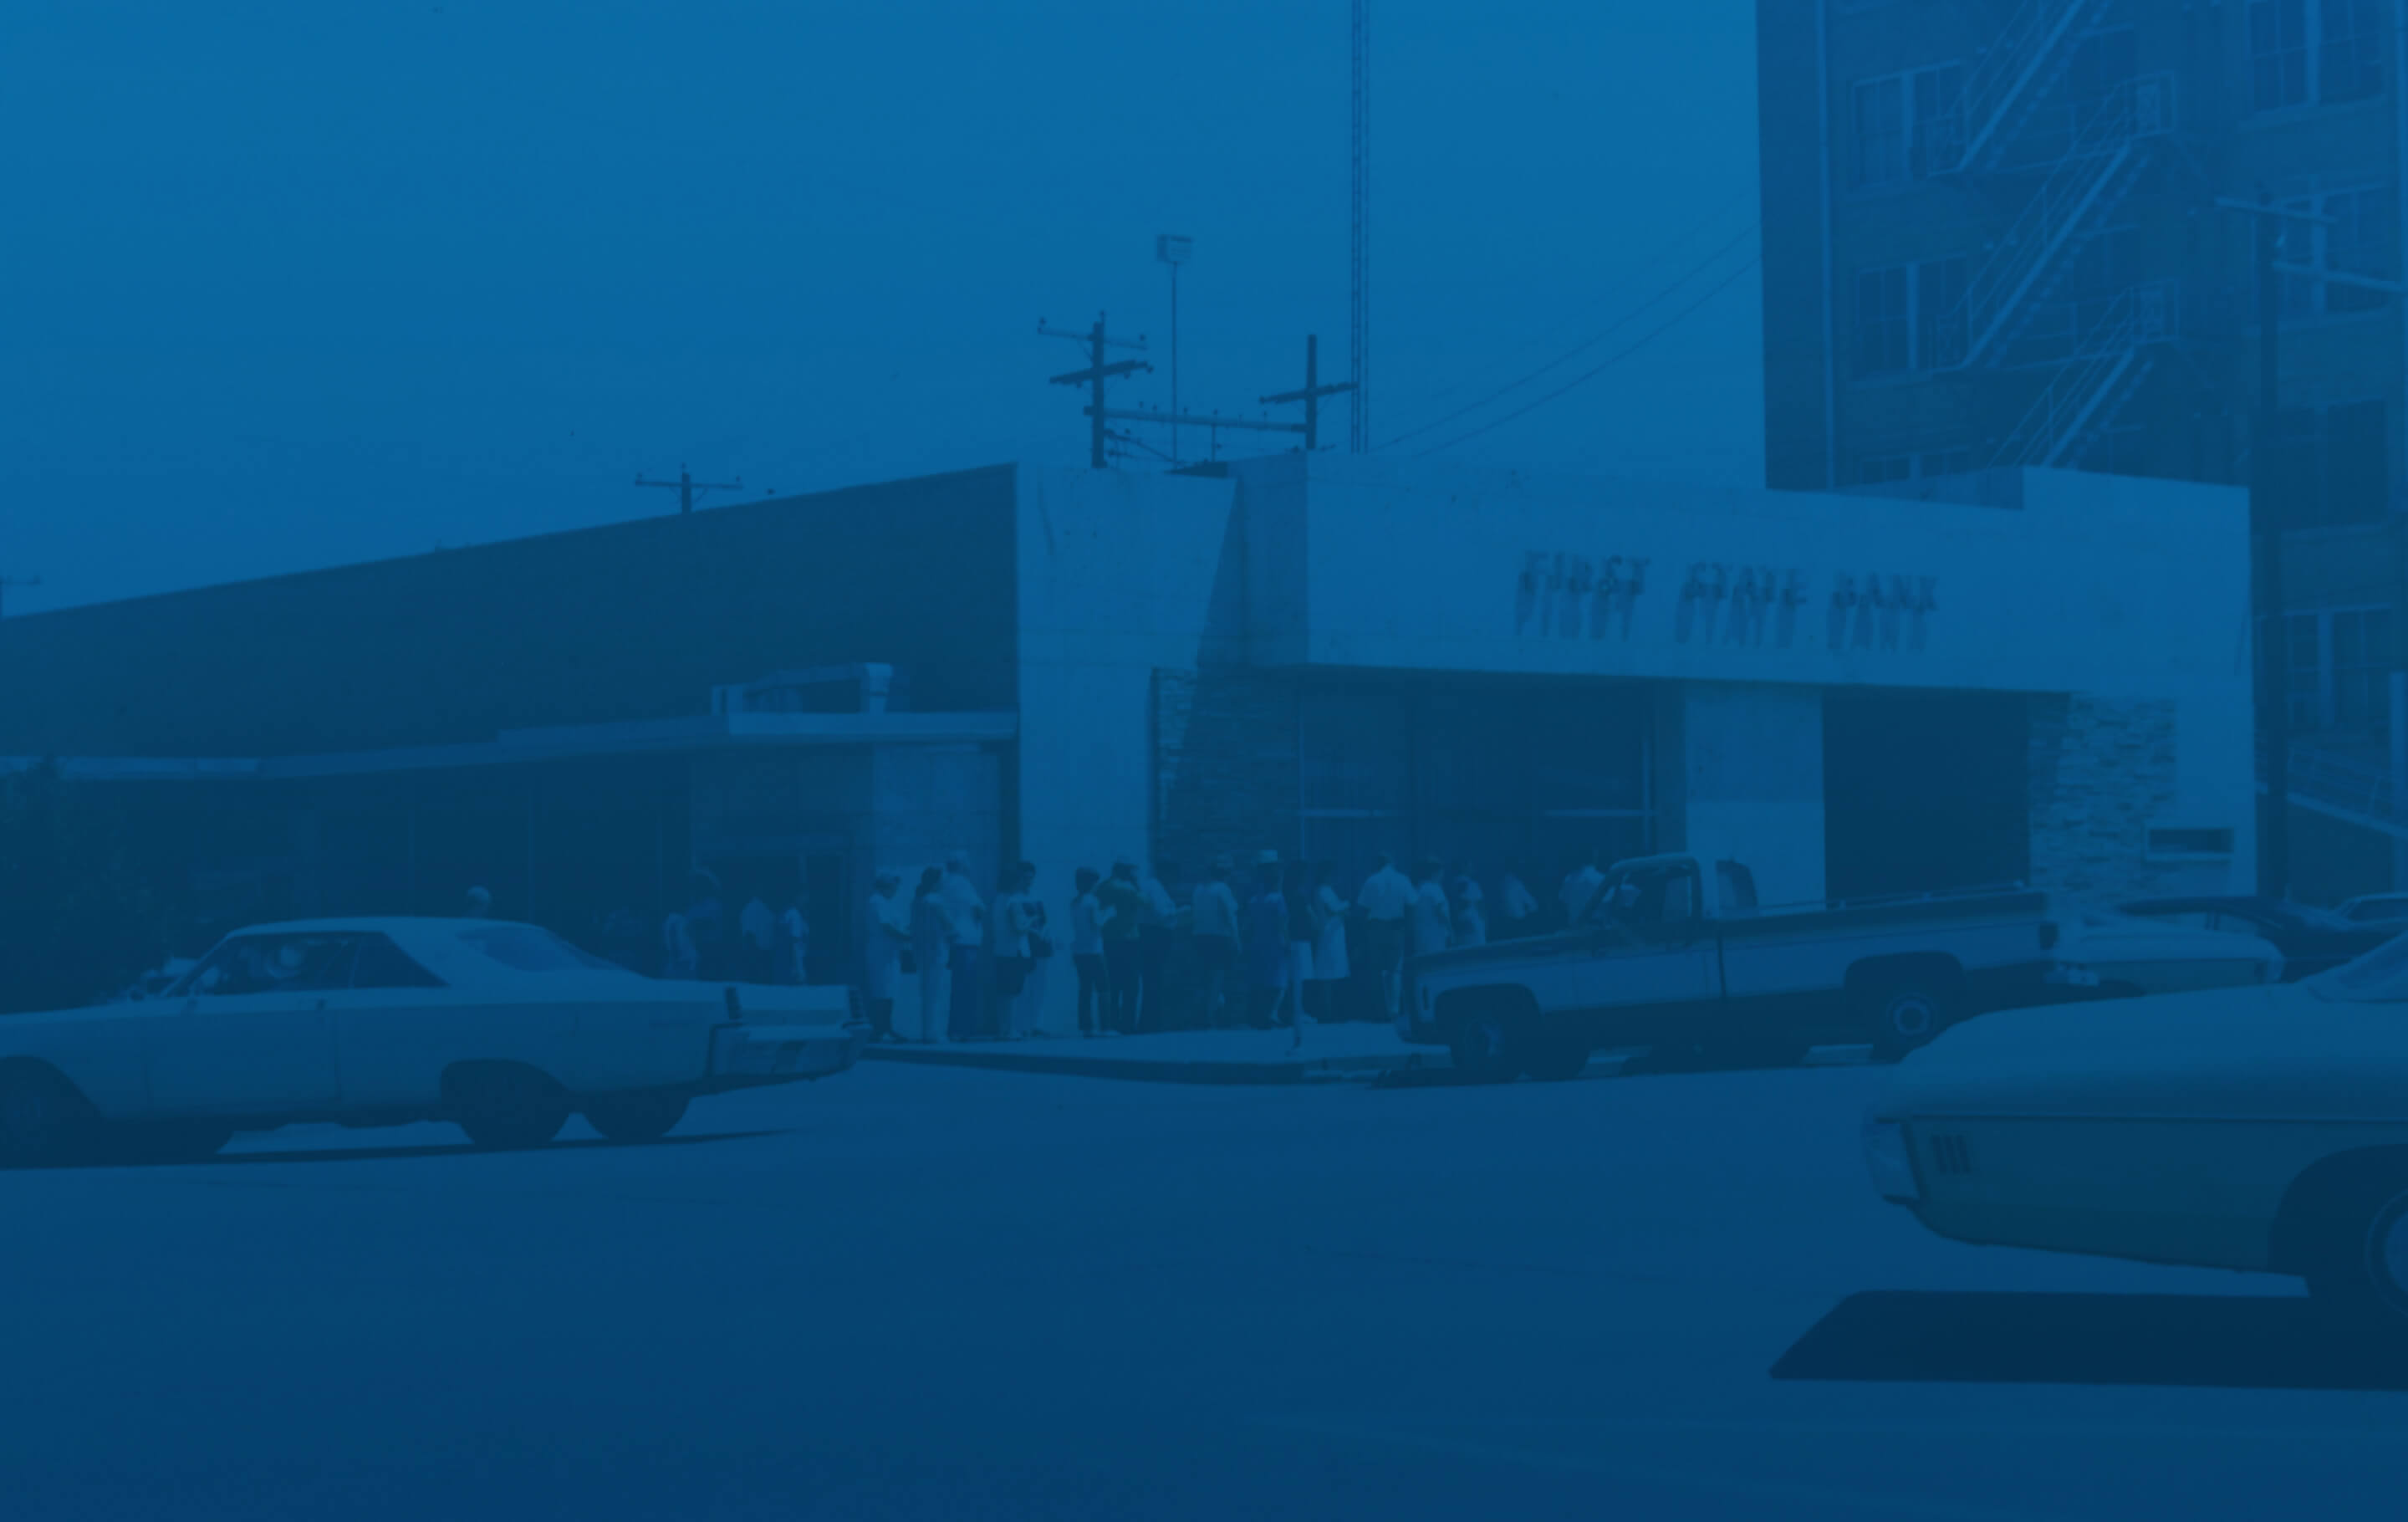 Background image: 1980s people lined up in front of a bank